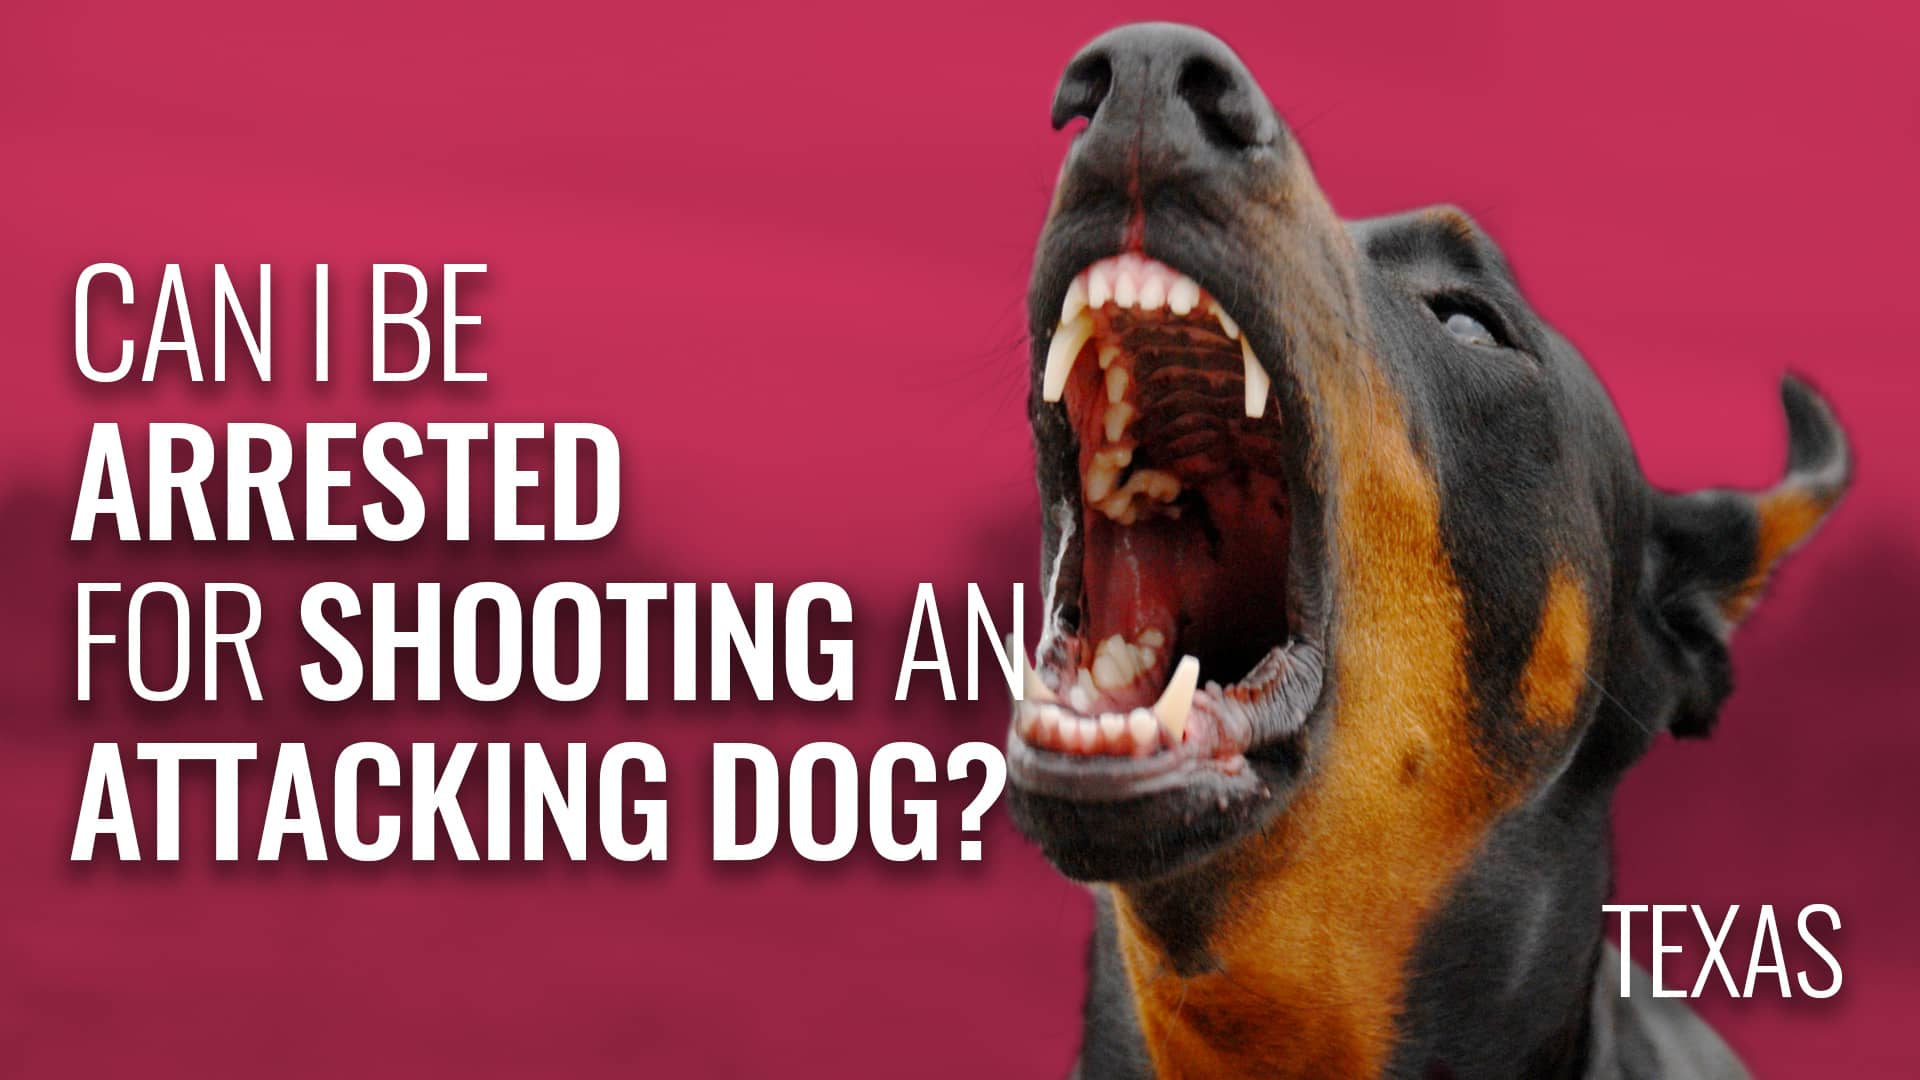 Can I Be Arrested for Shooting an Attacking Dog? | Texas on Vimeo